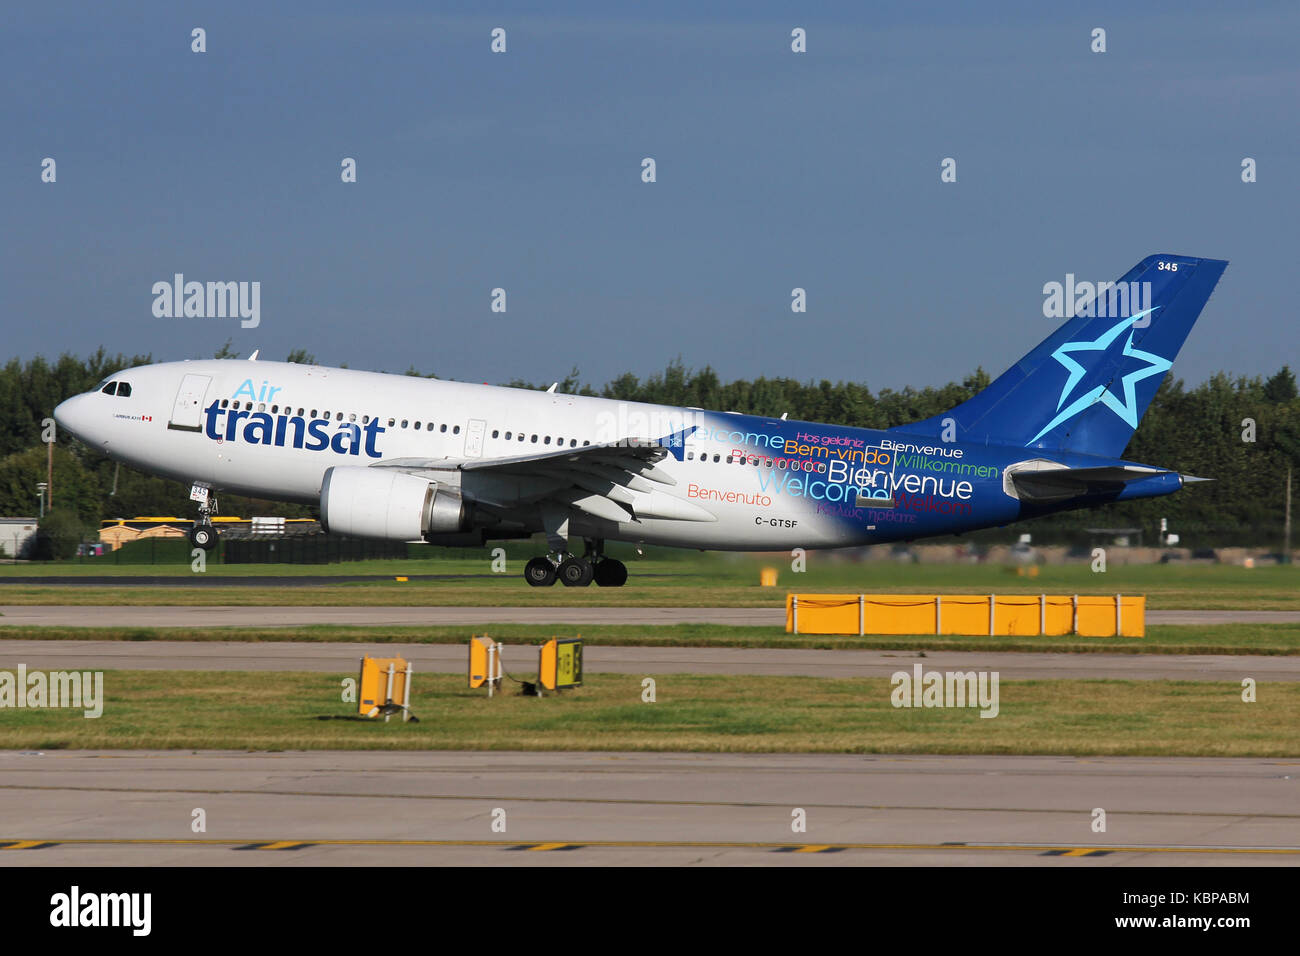 Air Transat Airbus A310 taking off from Manchester airport on a flight to Canada Stock Photo